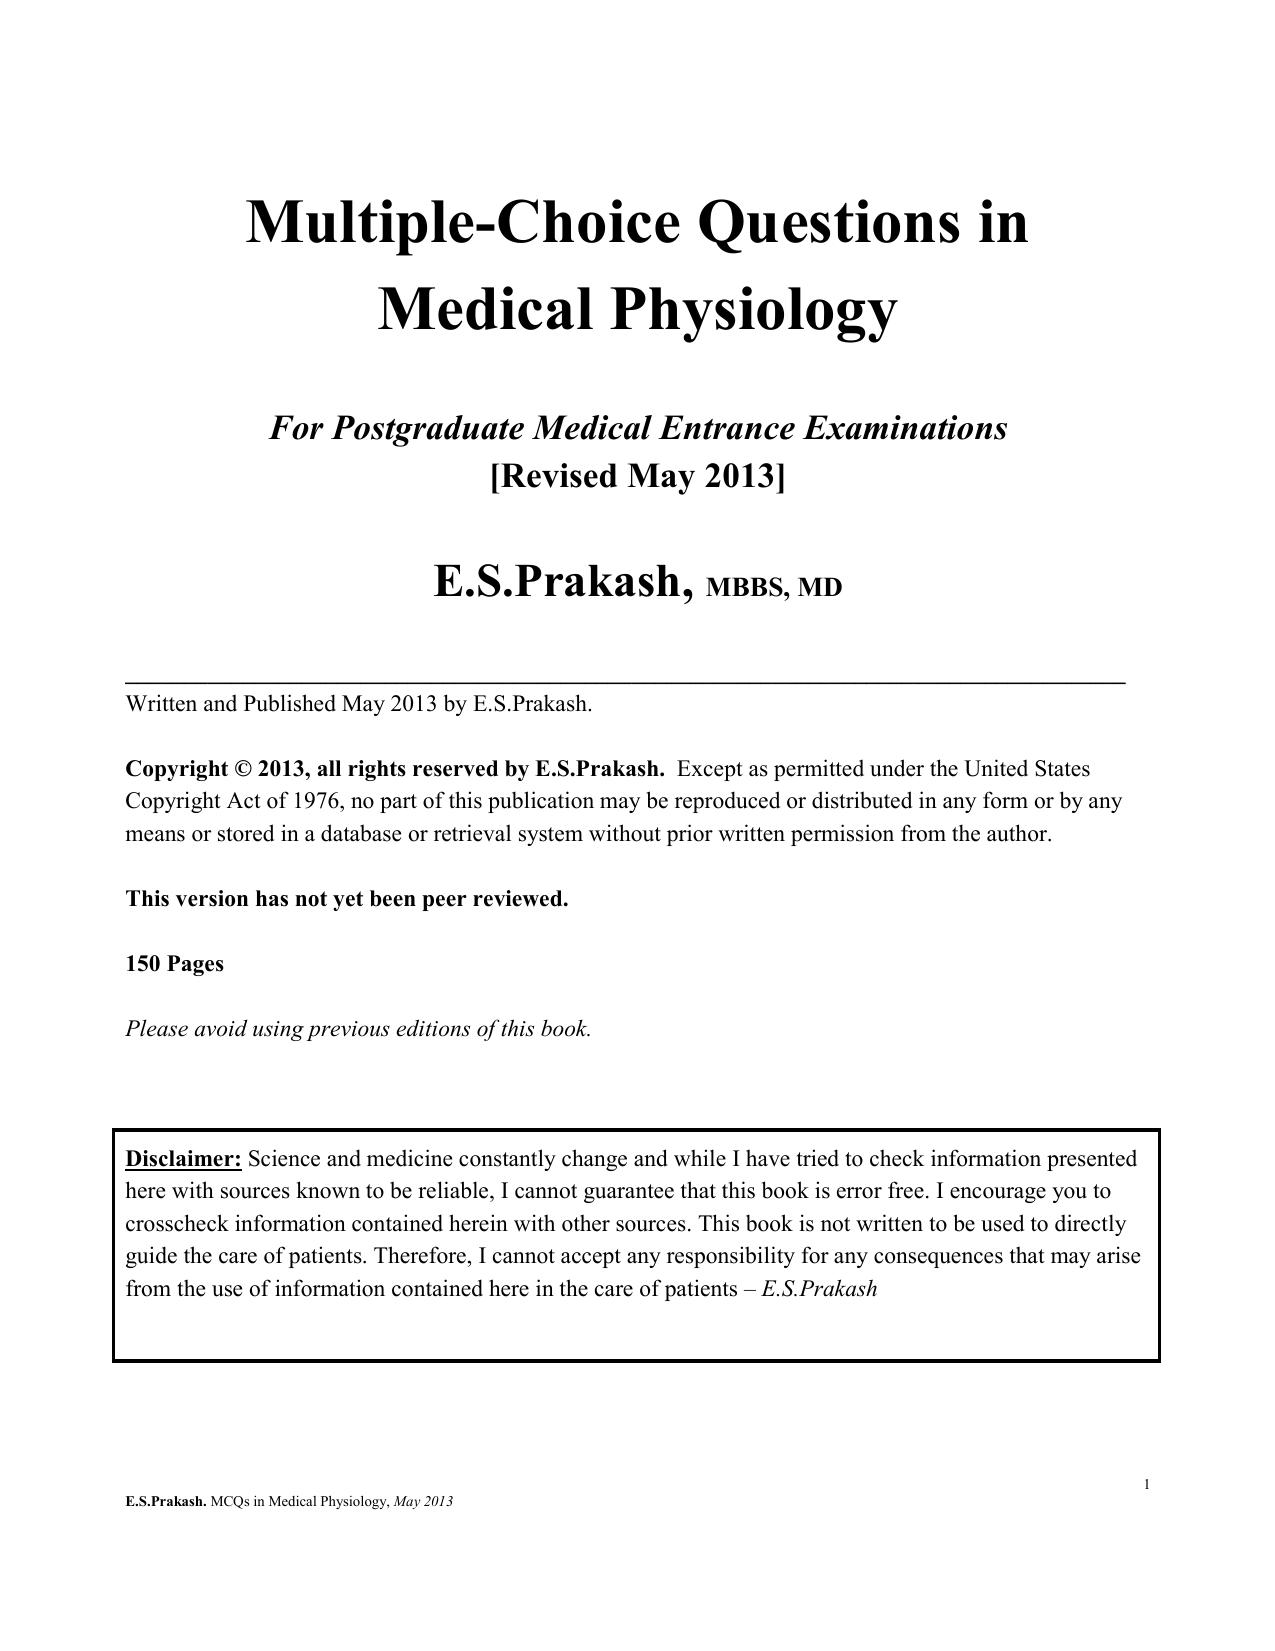 Multiple Choice Questions in Medical Physiology